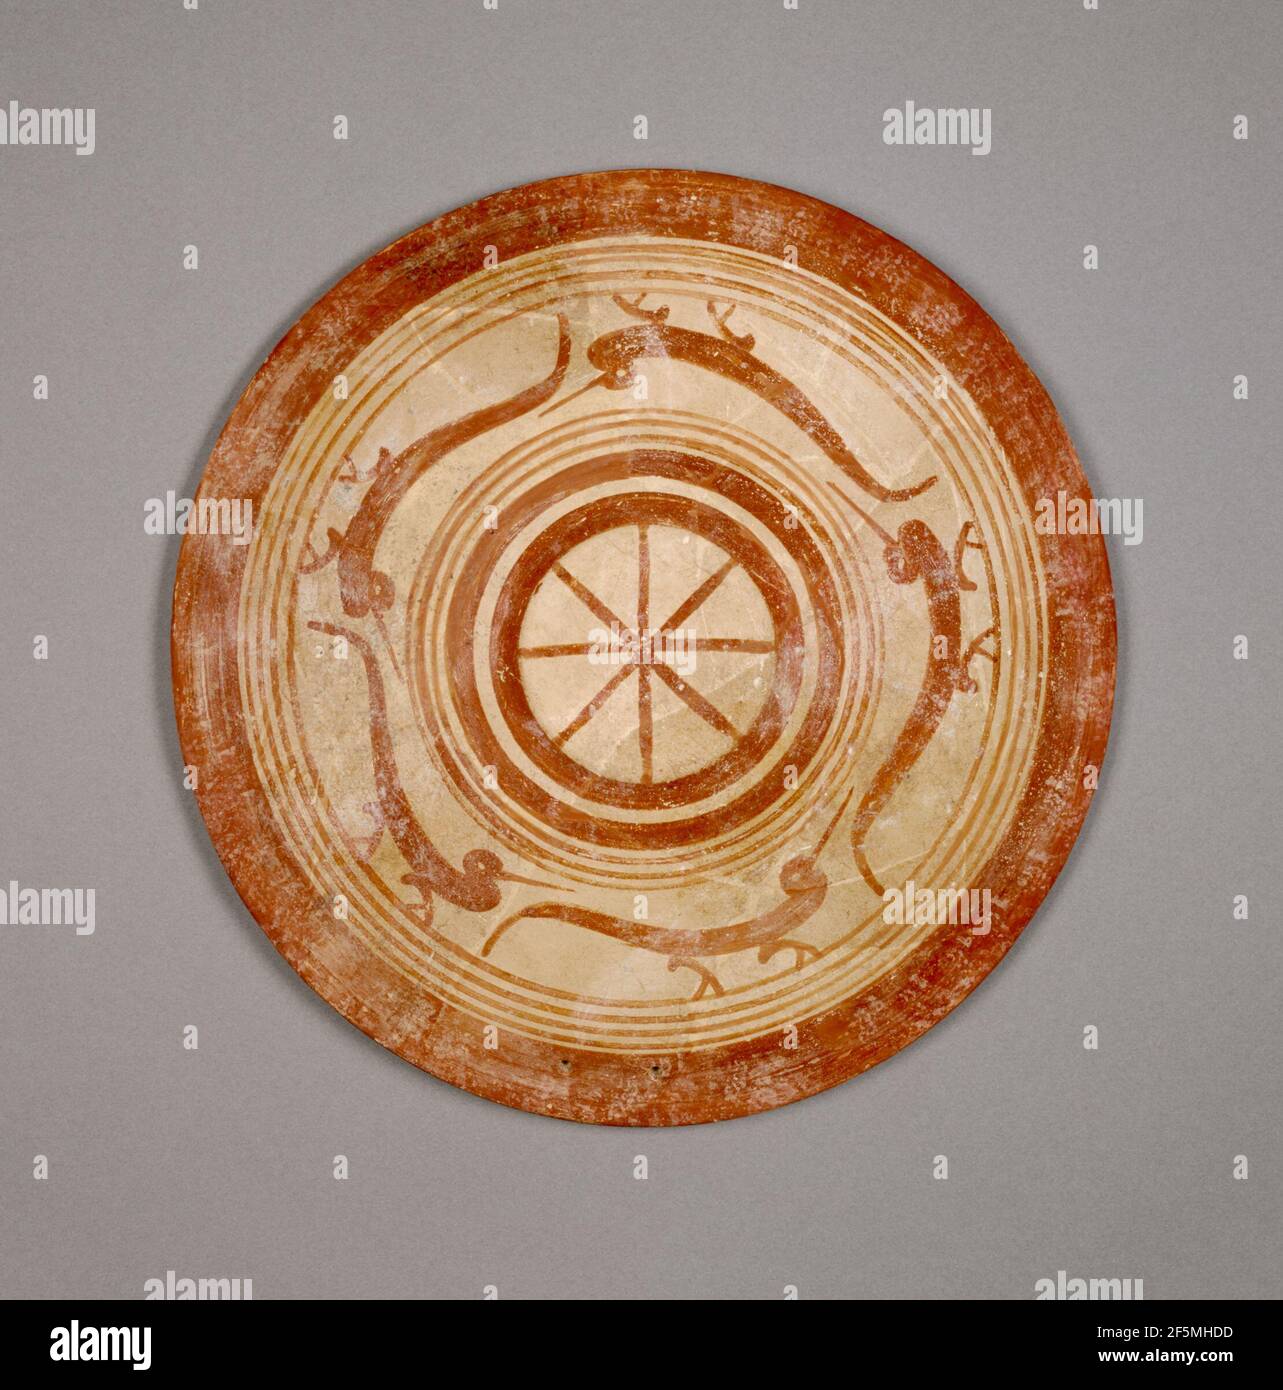 Subgeometric Plate. Attributed to the Heron Class (Etruscan, active 680 - 660 B.C.) Stock Photo